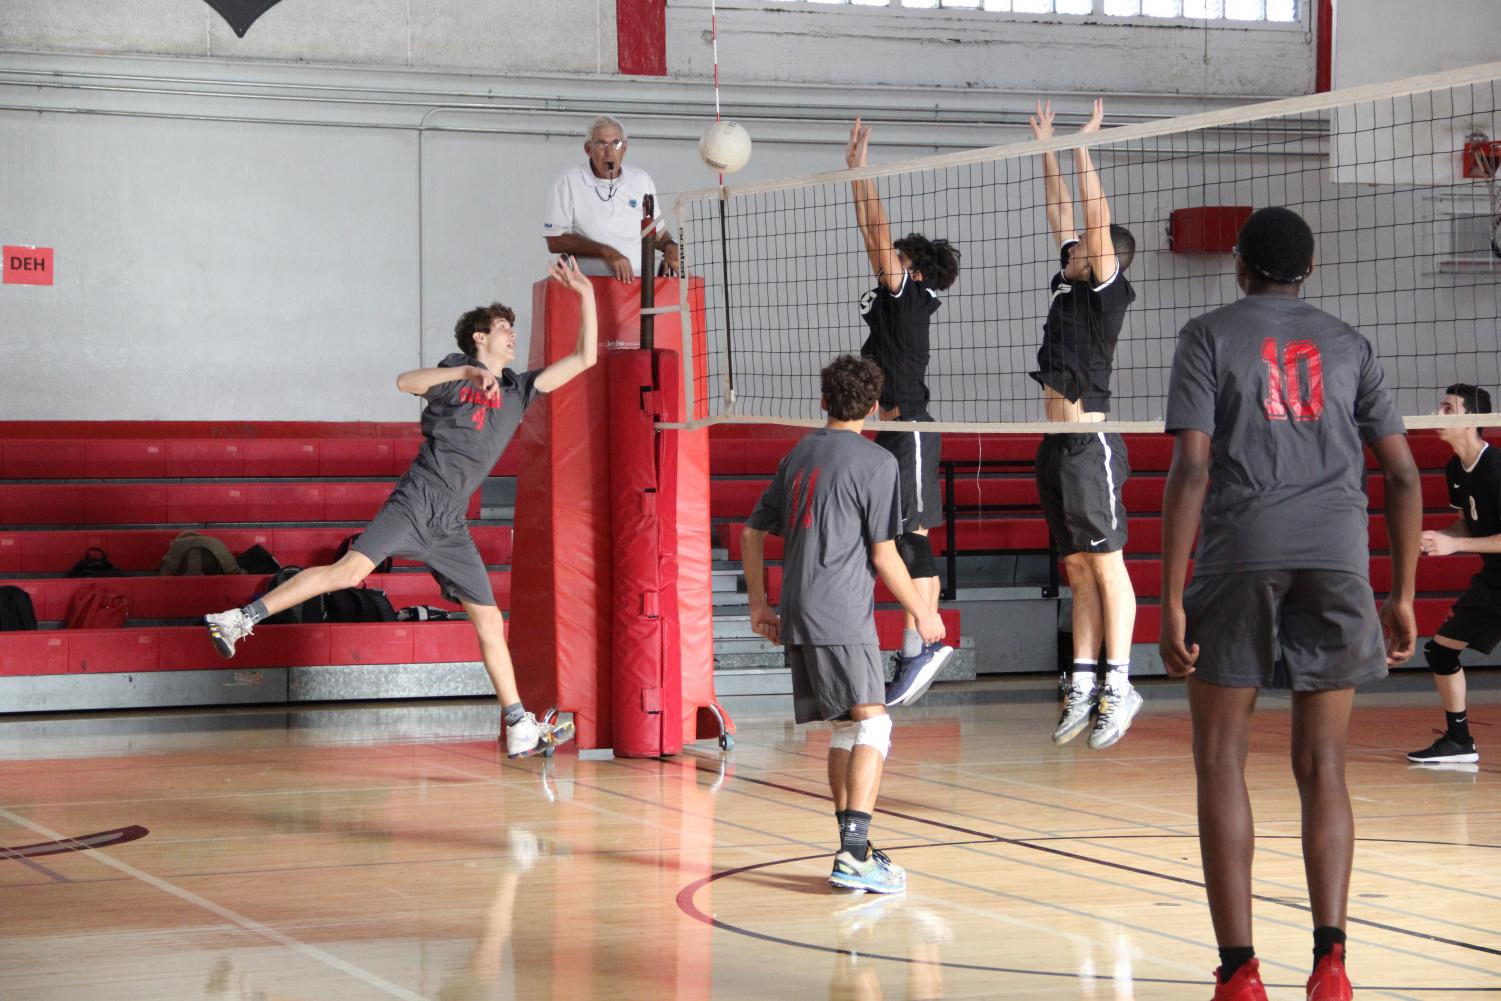 Gables+Volleyball+Starts+Off+Strong+Against+Westland